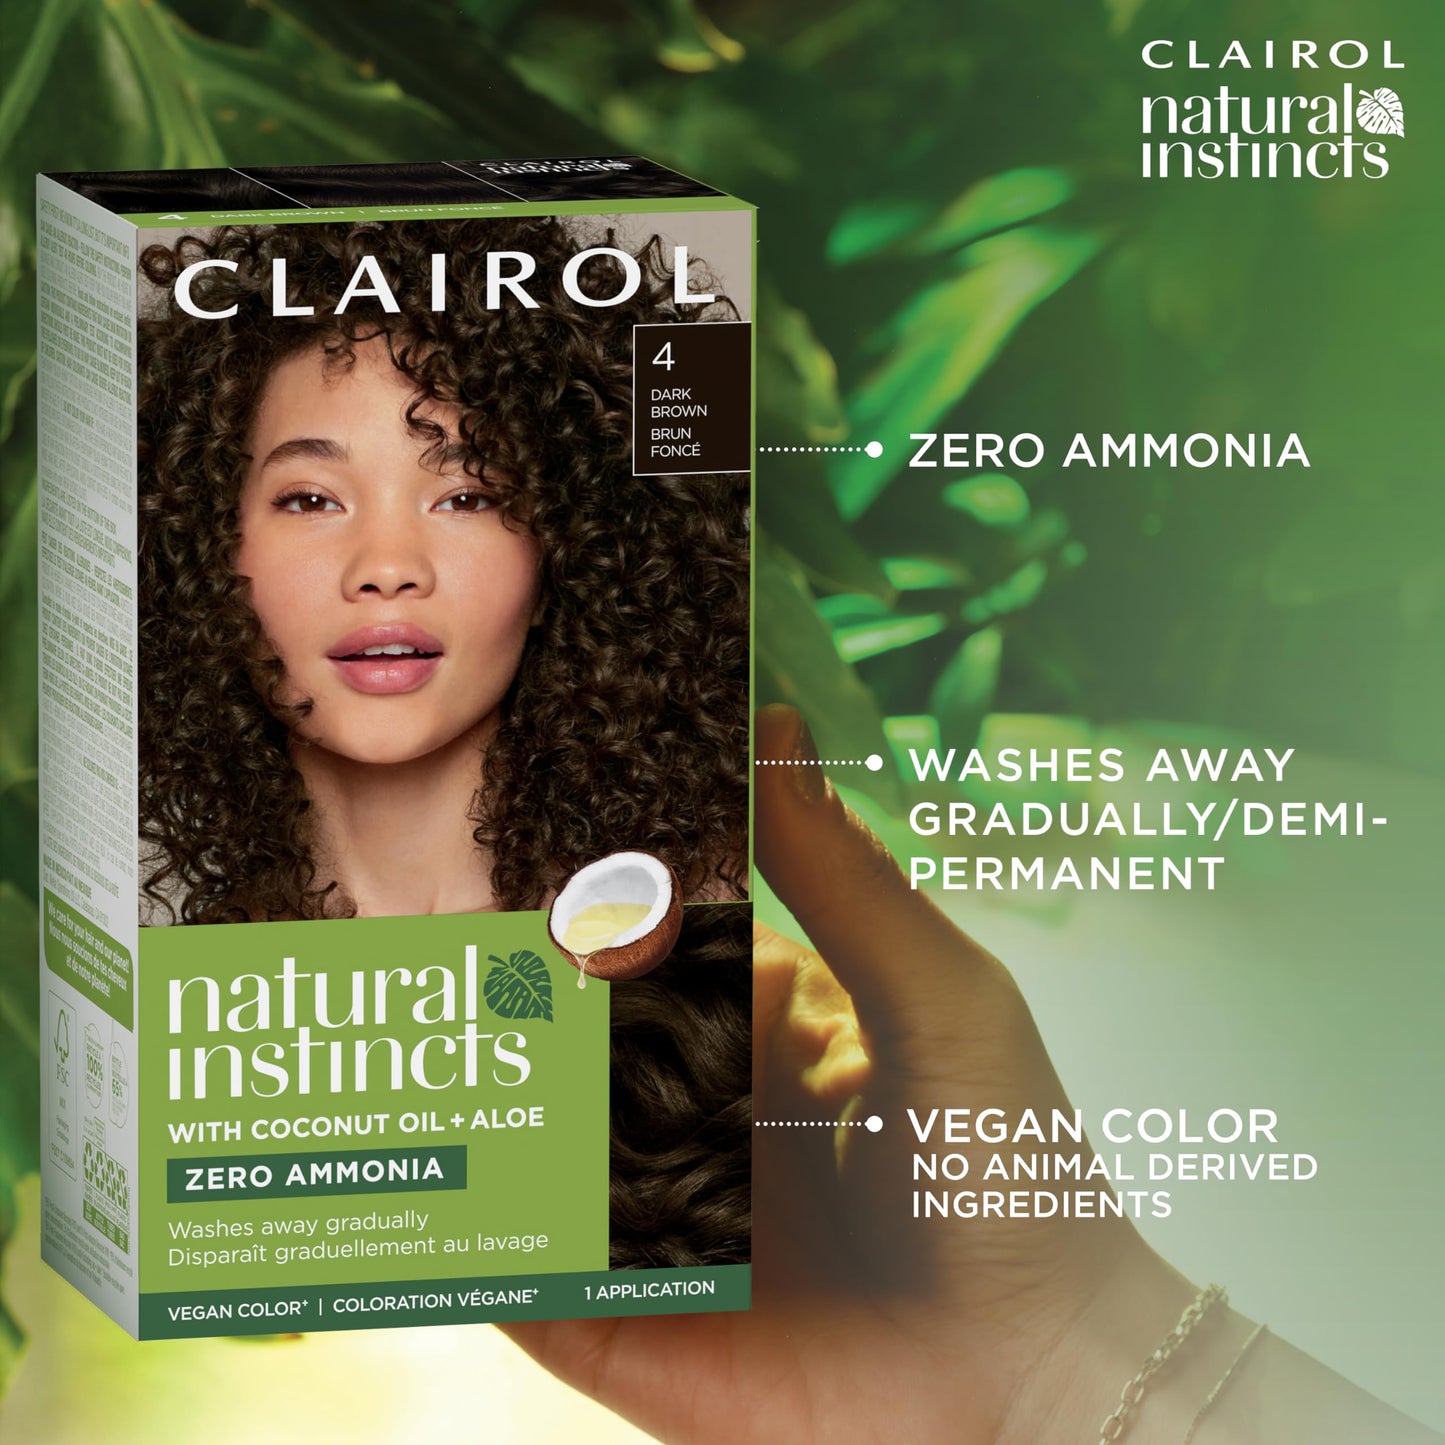 Clairol Natural Instincts Demi-Permanent Hair Dye, 6.5G Lightest Golden Brown Hair Color, Pack of 1